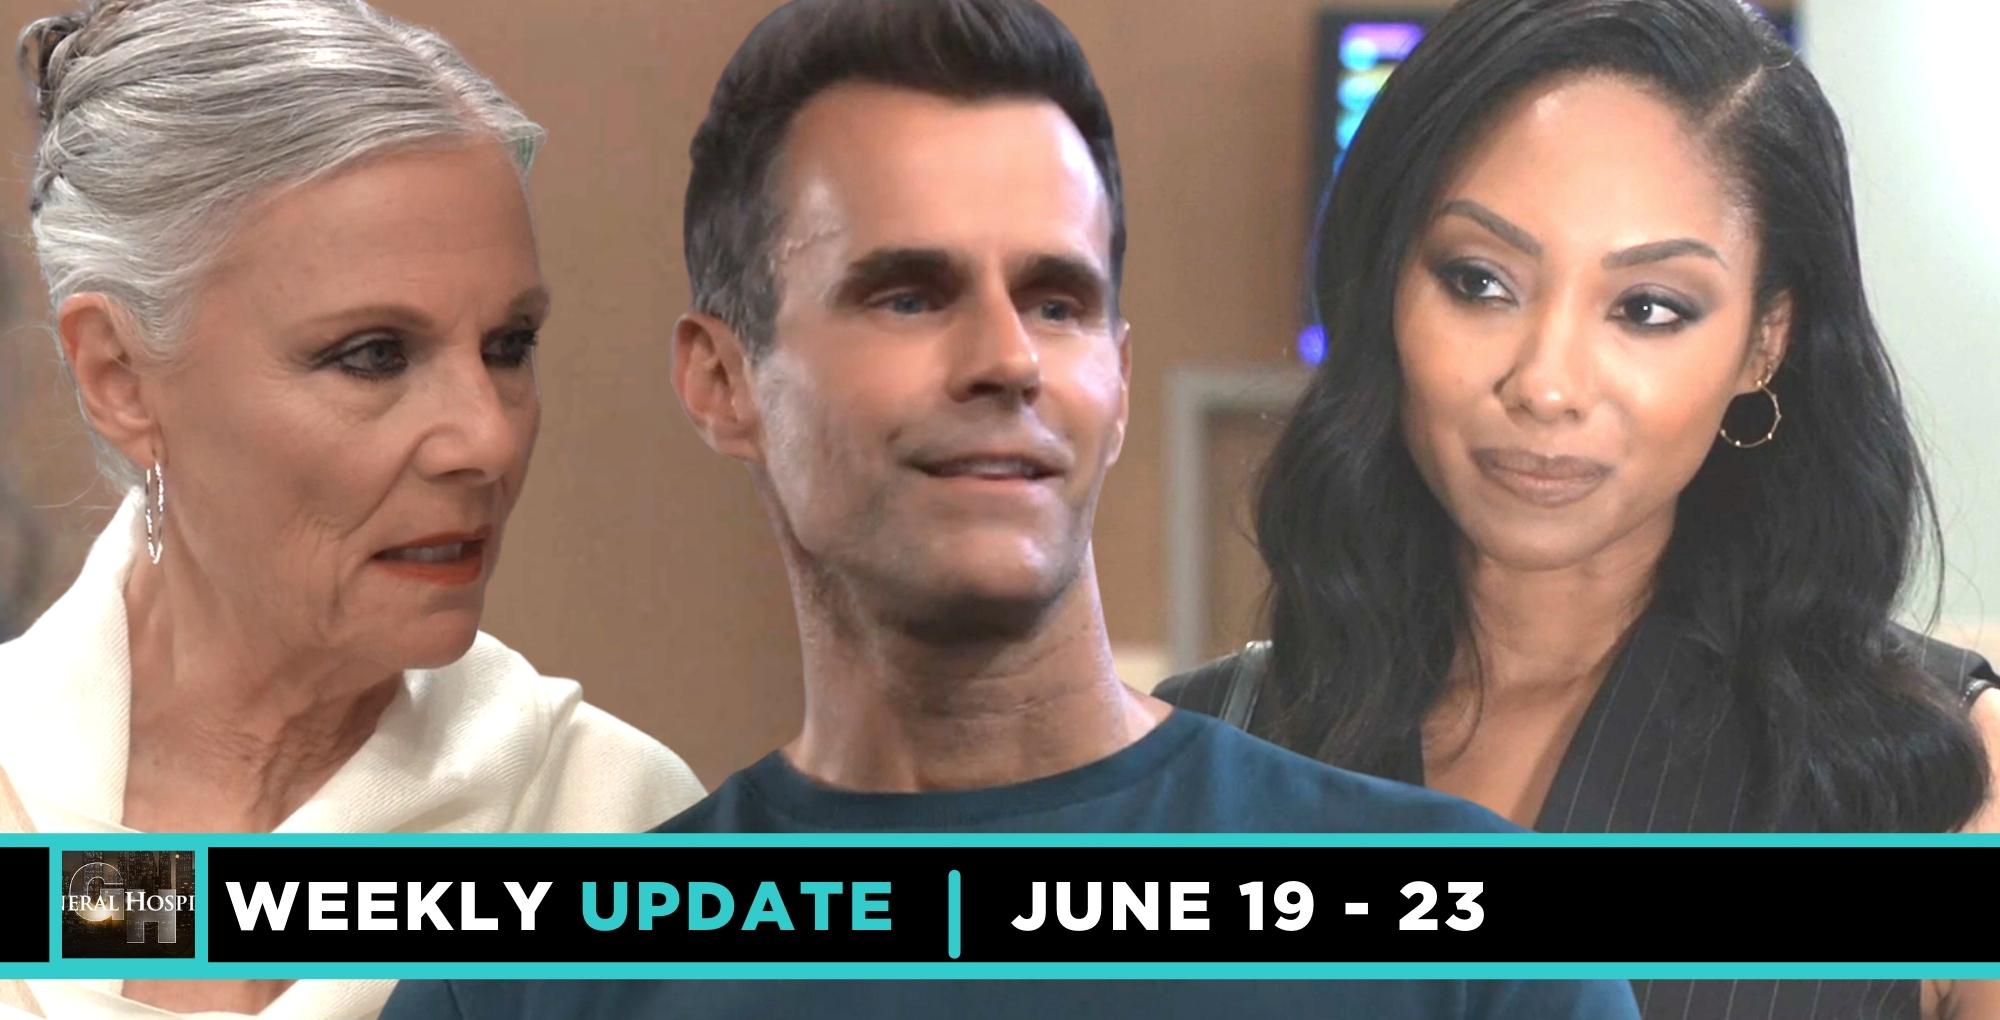 gh weekly spoilers update features tracy, drew, and jordan.